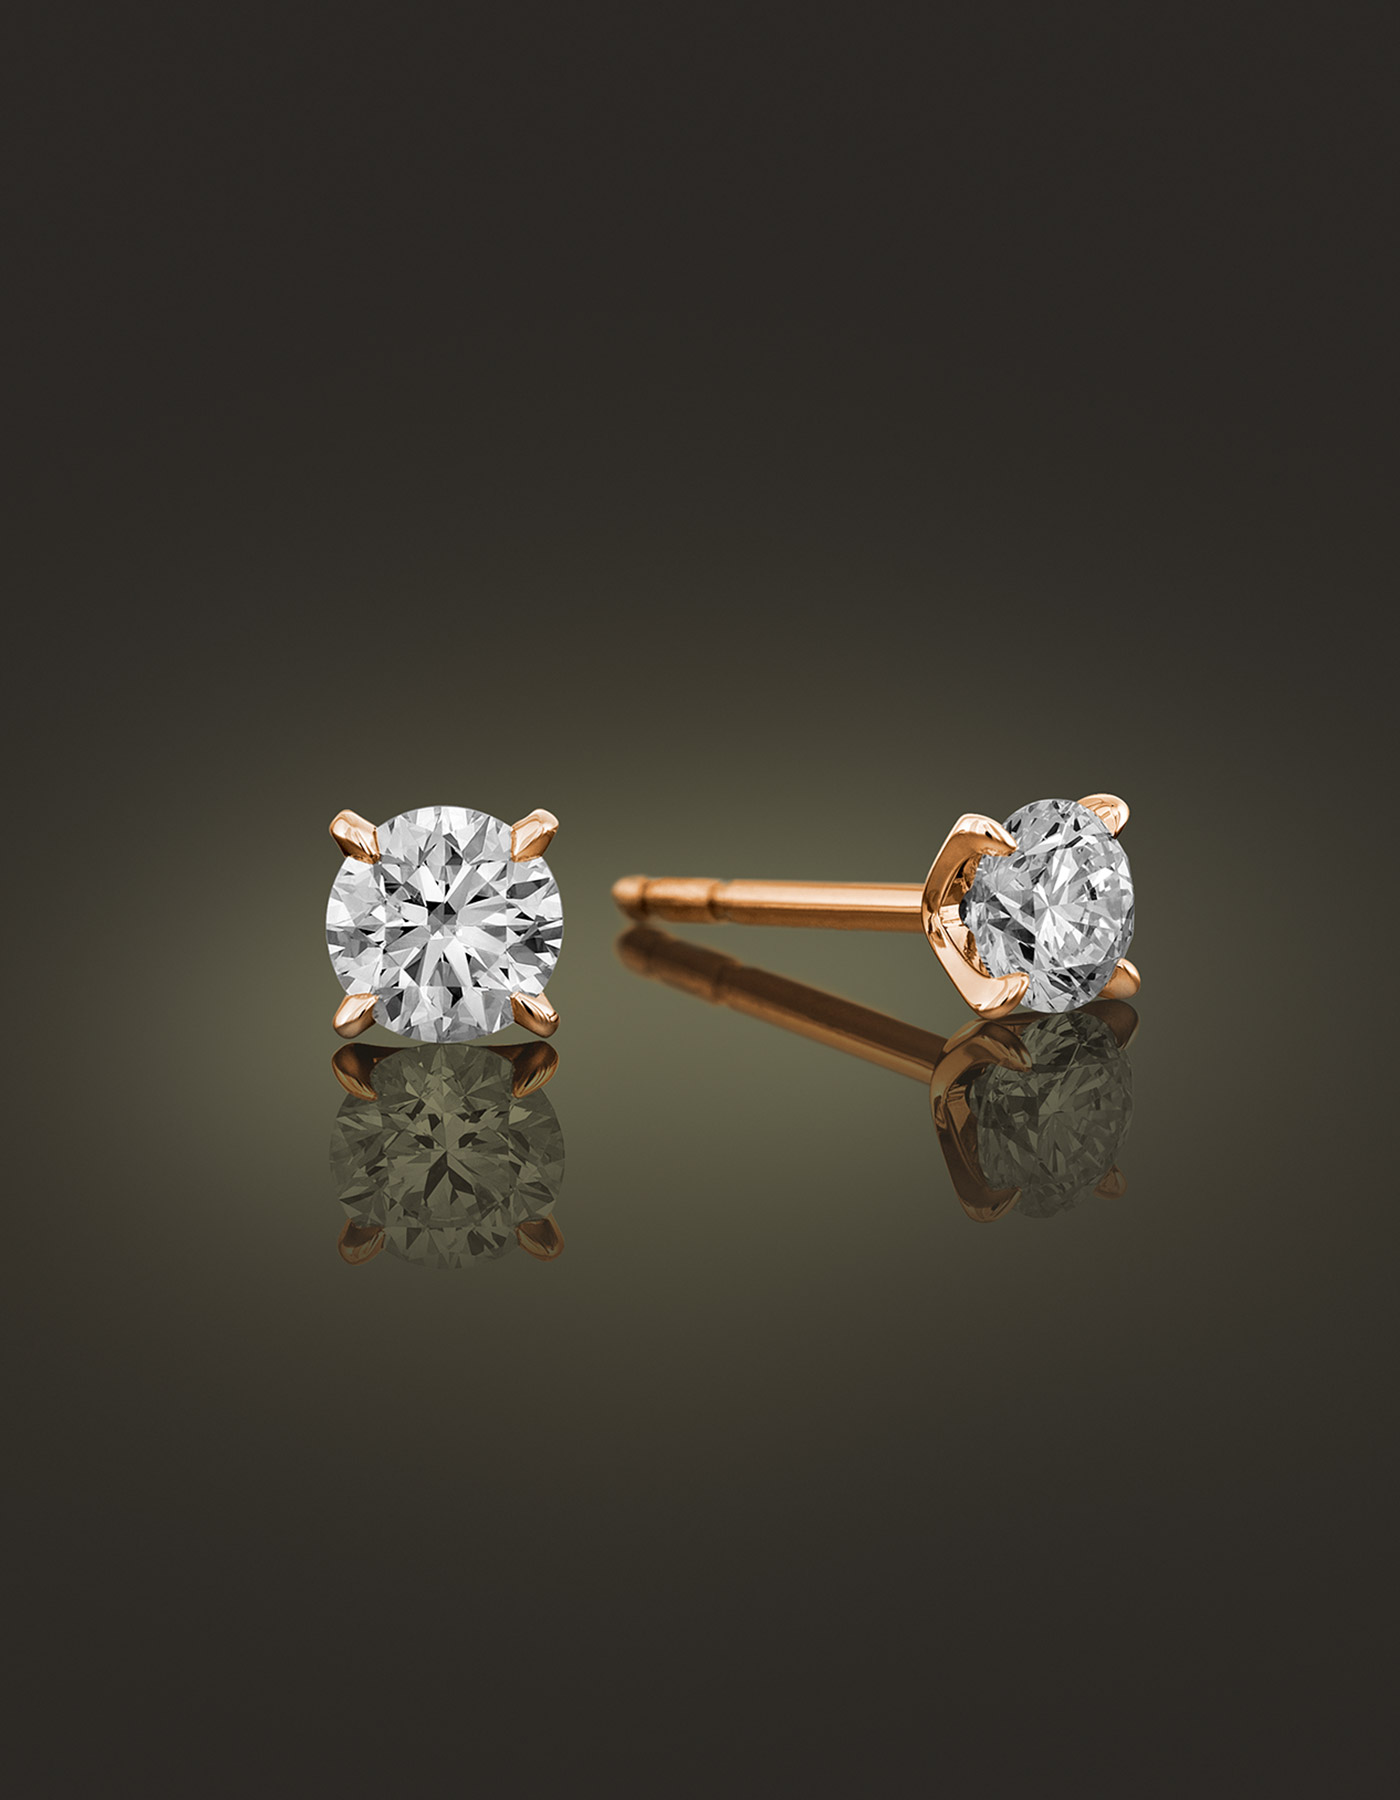 Guinnot Anonymous Solitaire diamond earrings in 18k rose gold